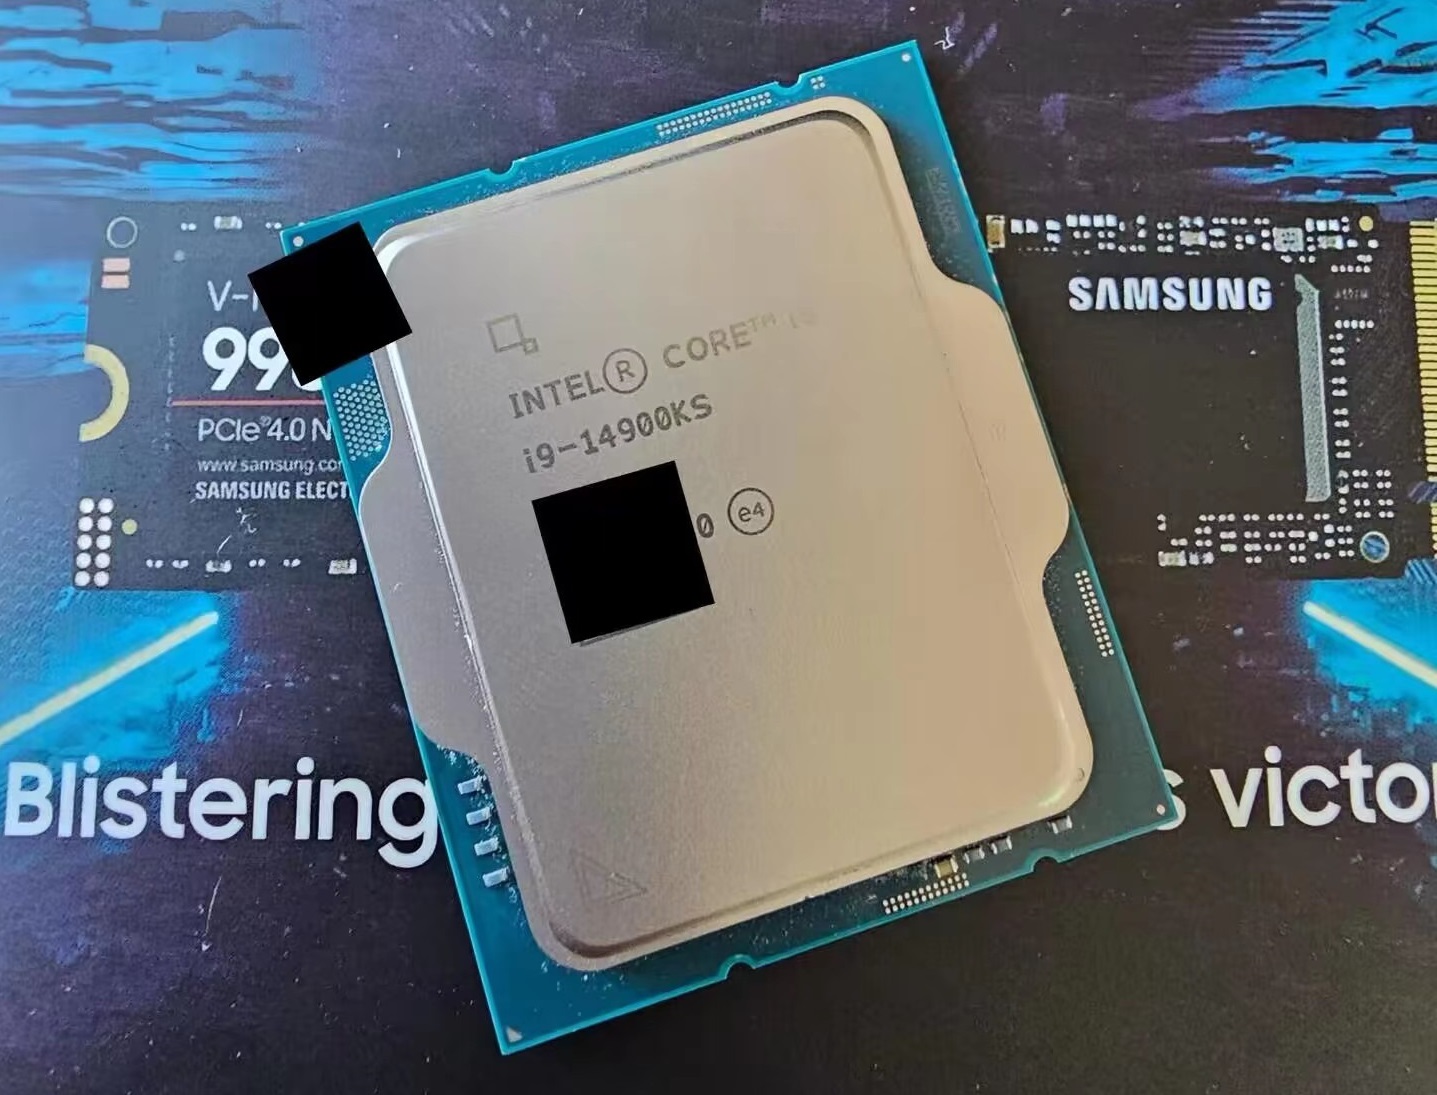 Pushing past 6 GHz! An alleged Intel i9 14900KS CPU has been pictured